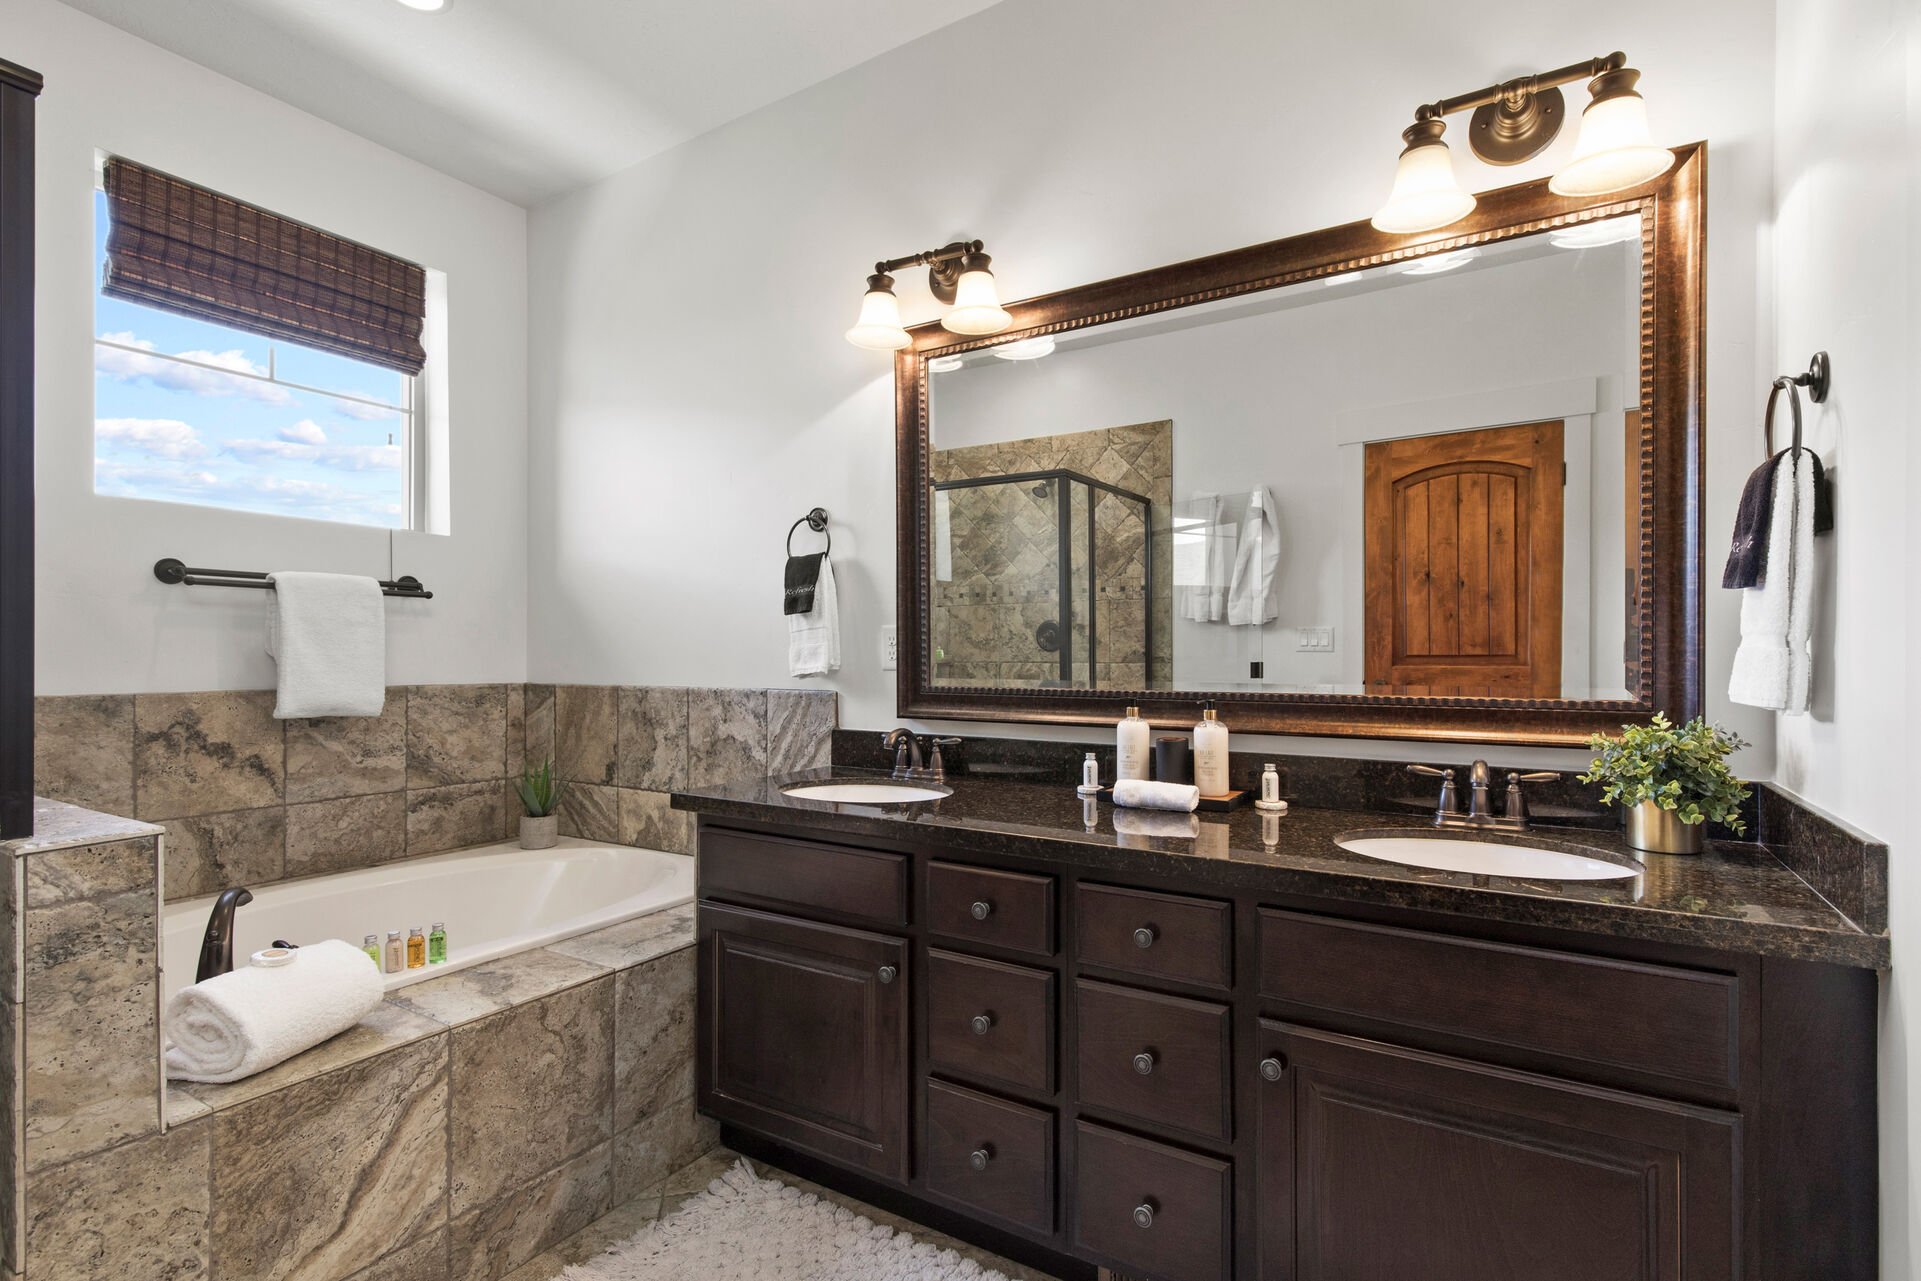 Master Bathroom with double sinks, soaking tub, and large tile & glass shower